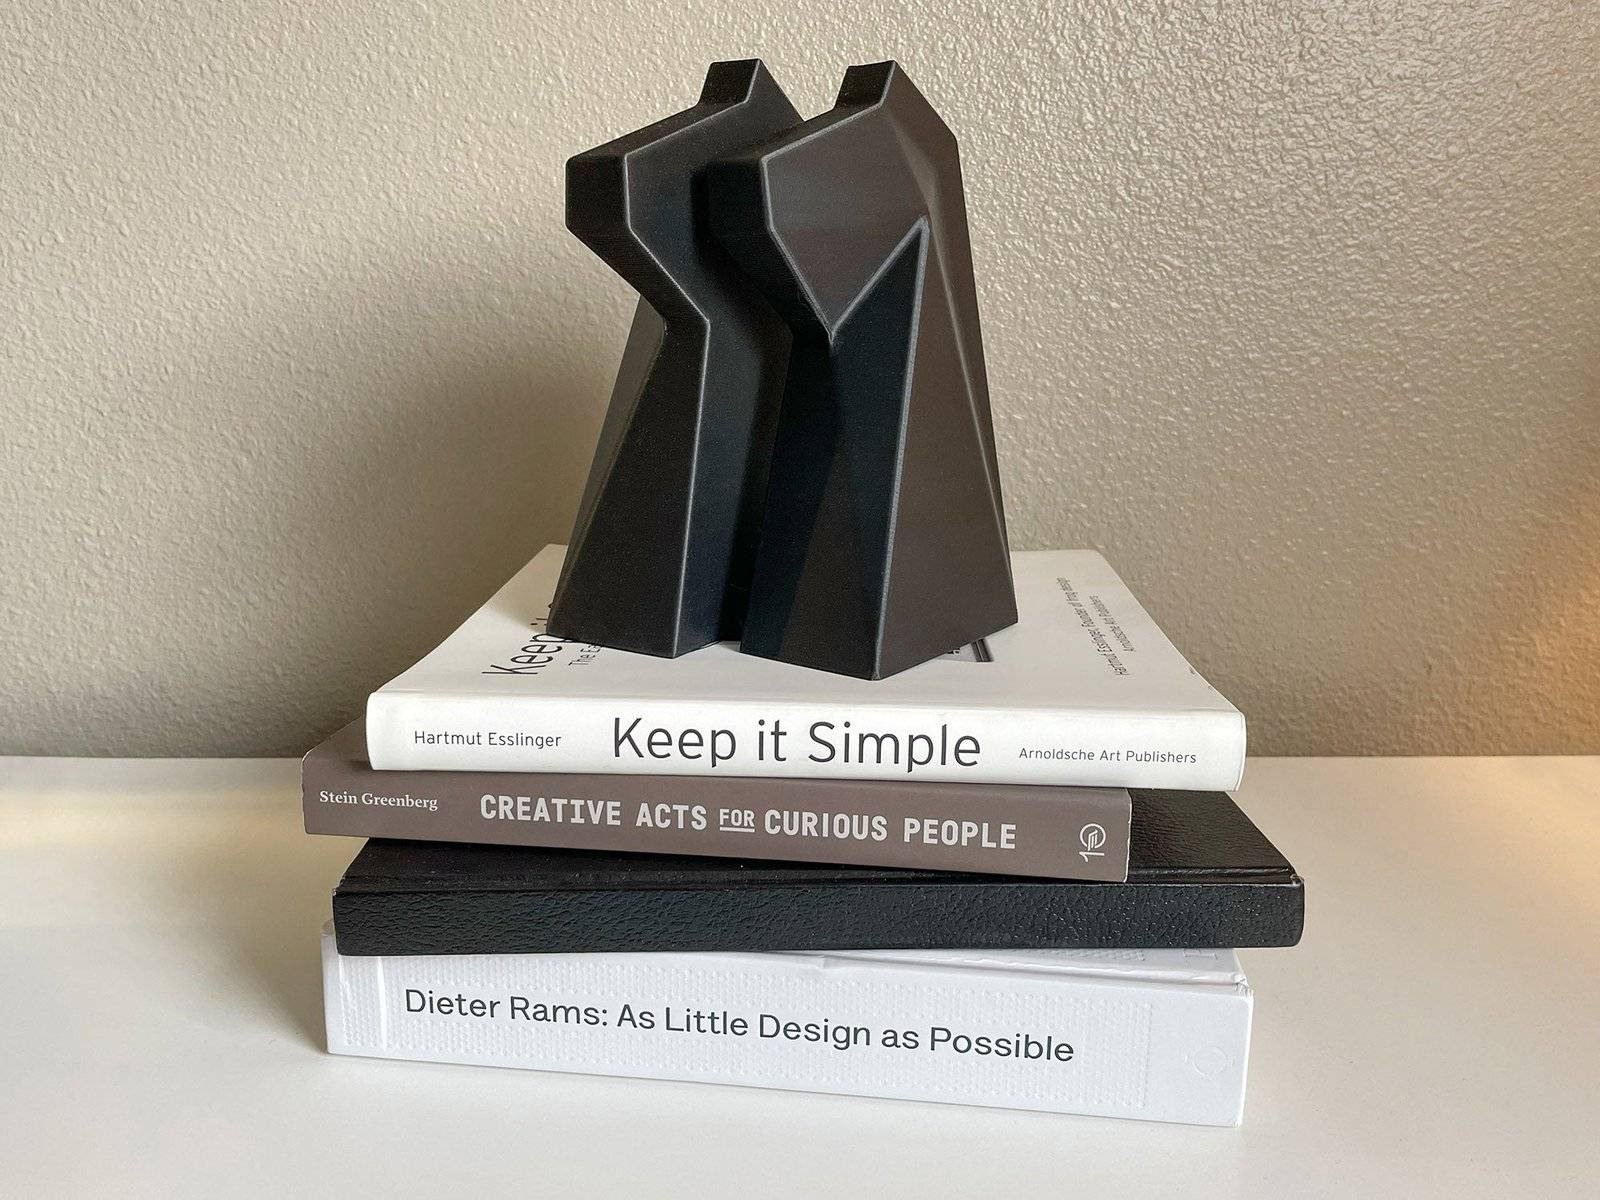 Chess Knight Bookends | Modern, Geometric, 3D Printed, Weighted | Home Decor | Bookends for Shelves, Bookstop, Book Holder | Unique Gift